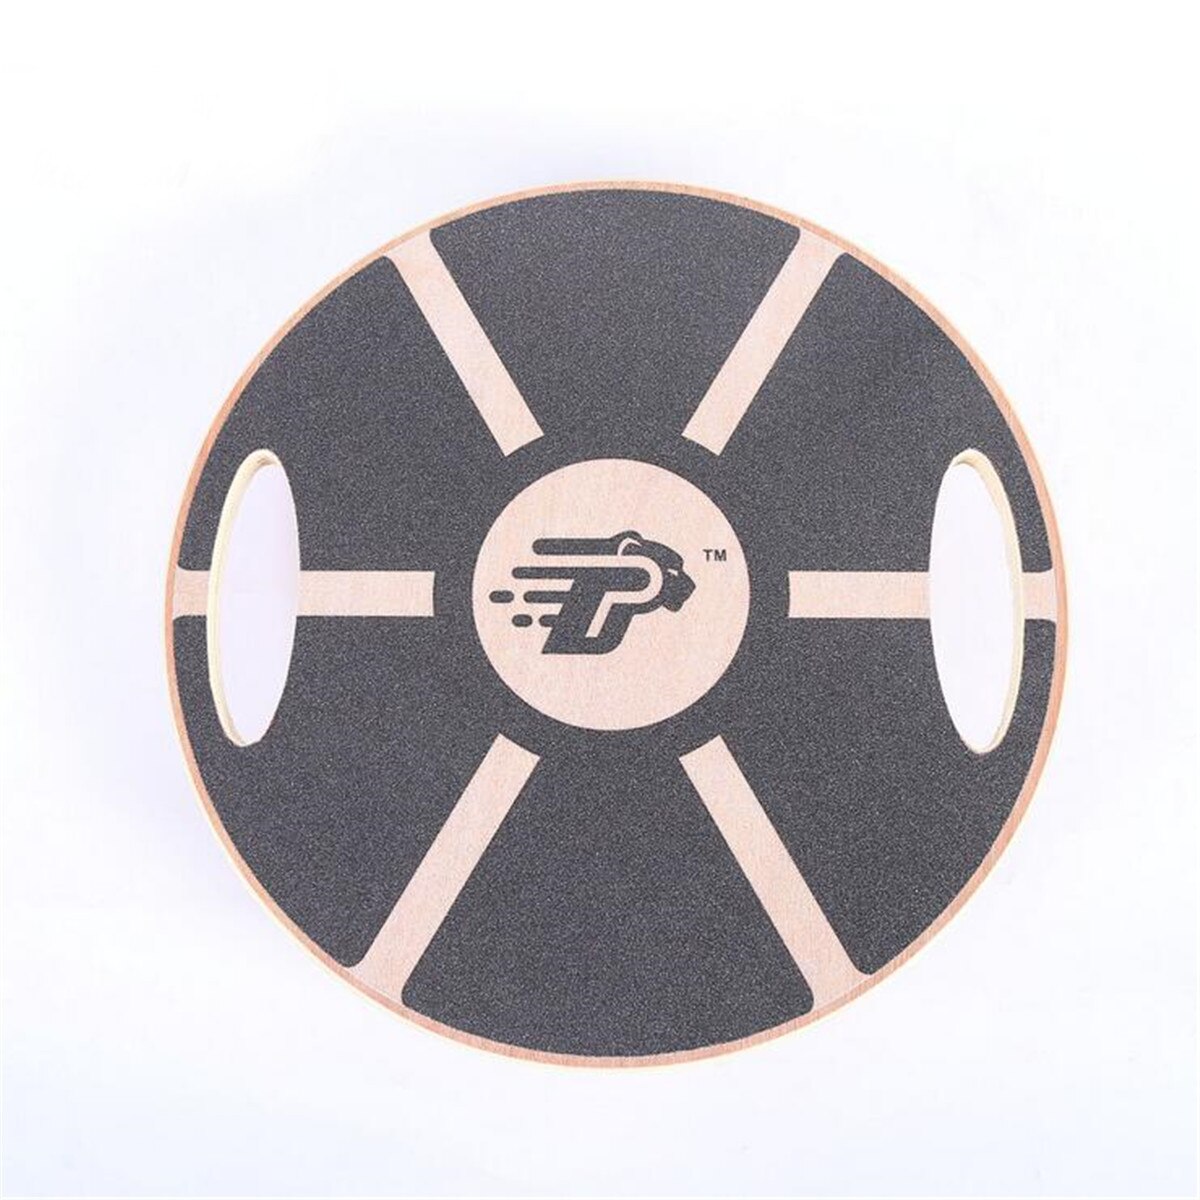 Round Wooden Balance Trainer Board Non-Slip Hand Grip Balance Board Sport Yoga Fitness Exercise Training Tool Twist Boards